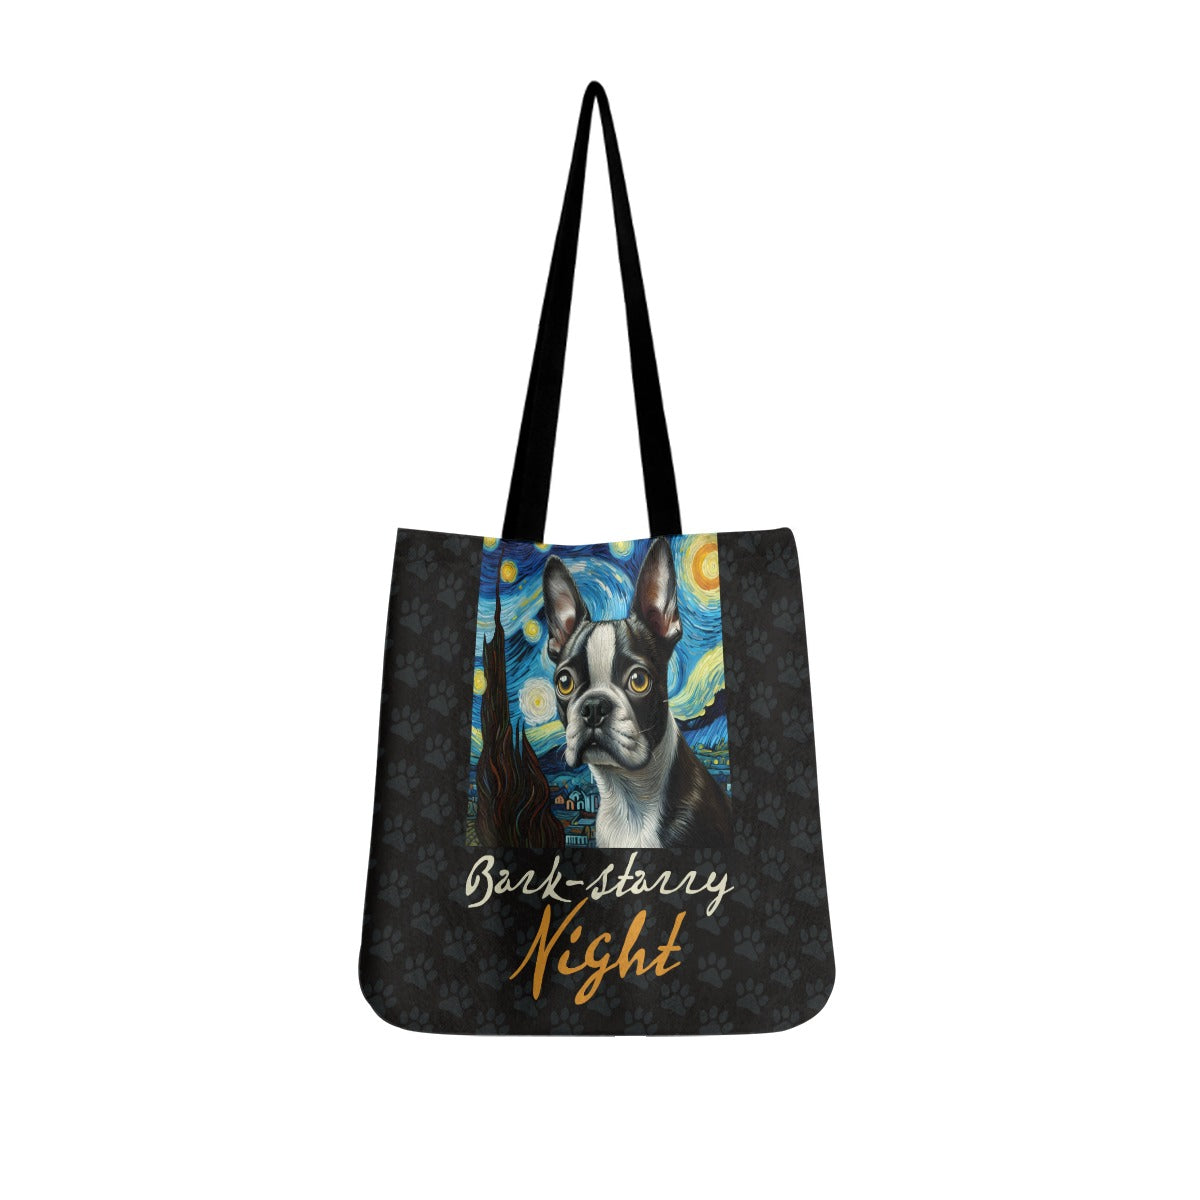 Runt - Cloth Tote Bags for Boston Terrier lovers